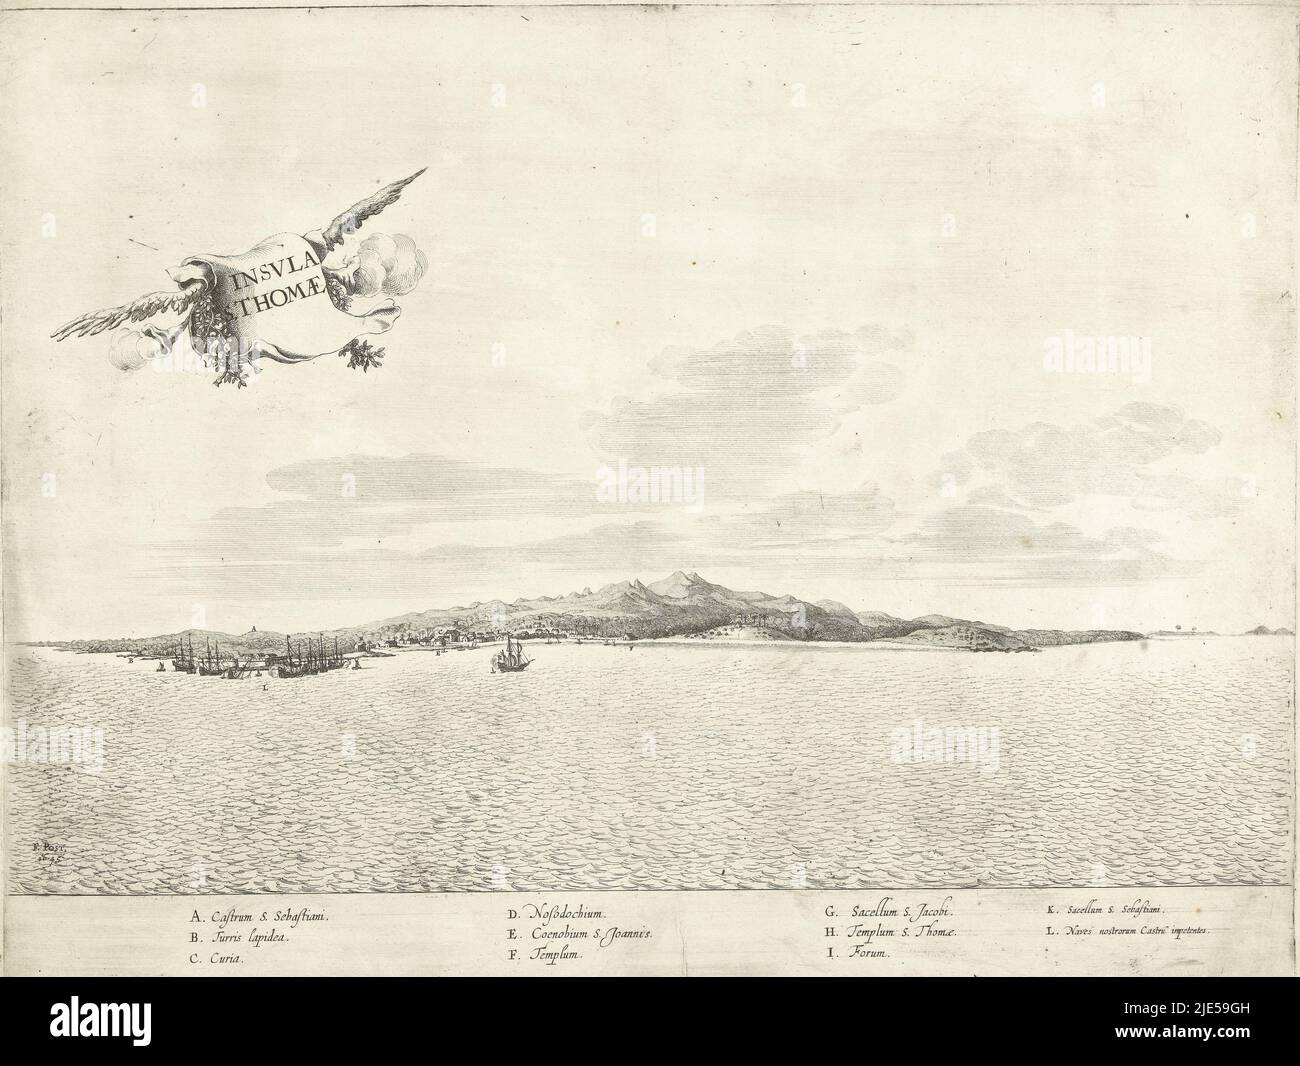 View of the African island of Sao Tome, ca. 1641. The island was conquered by a Dutch fleet of the MIC under the command of Cornelis Cornelisz Jol, alias Houtebeen on 11 October 1641. In the foreground some Dutch ships. In the sky a winged banderole with the title decorated with two smoked horns. In the caption the explanation of the letters A-L in Latin, View of Sao Tome, c. 1641 Insvla S. Thomae., print maker: Jan van Brosterhuyzen, intermediary draughtsman: Frans Jansz Post, Netherlands, 1645 - 1647, paper, etching, engraving, h 385 mm × w 505 mm Stock Photo